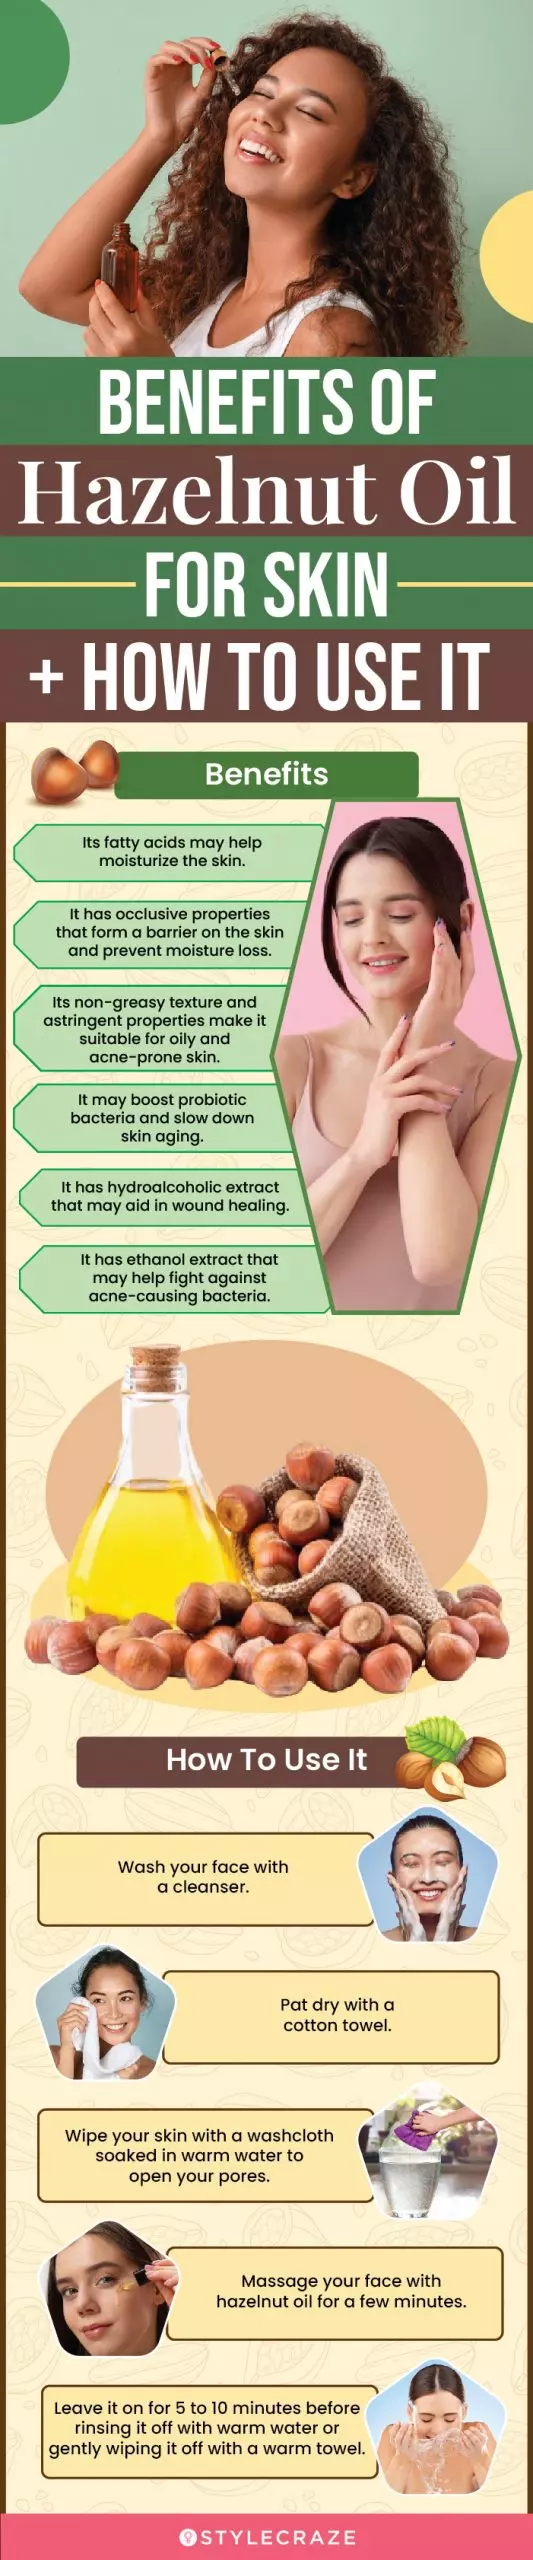 benefits of hazelnut oil for skin + how to use it (infographic)